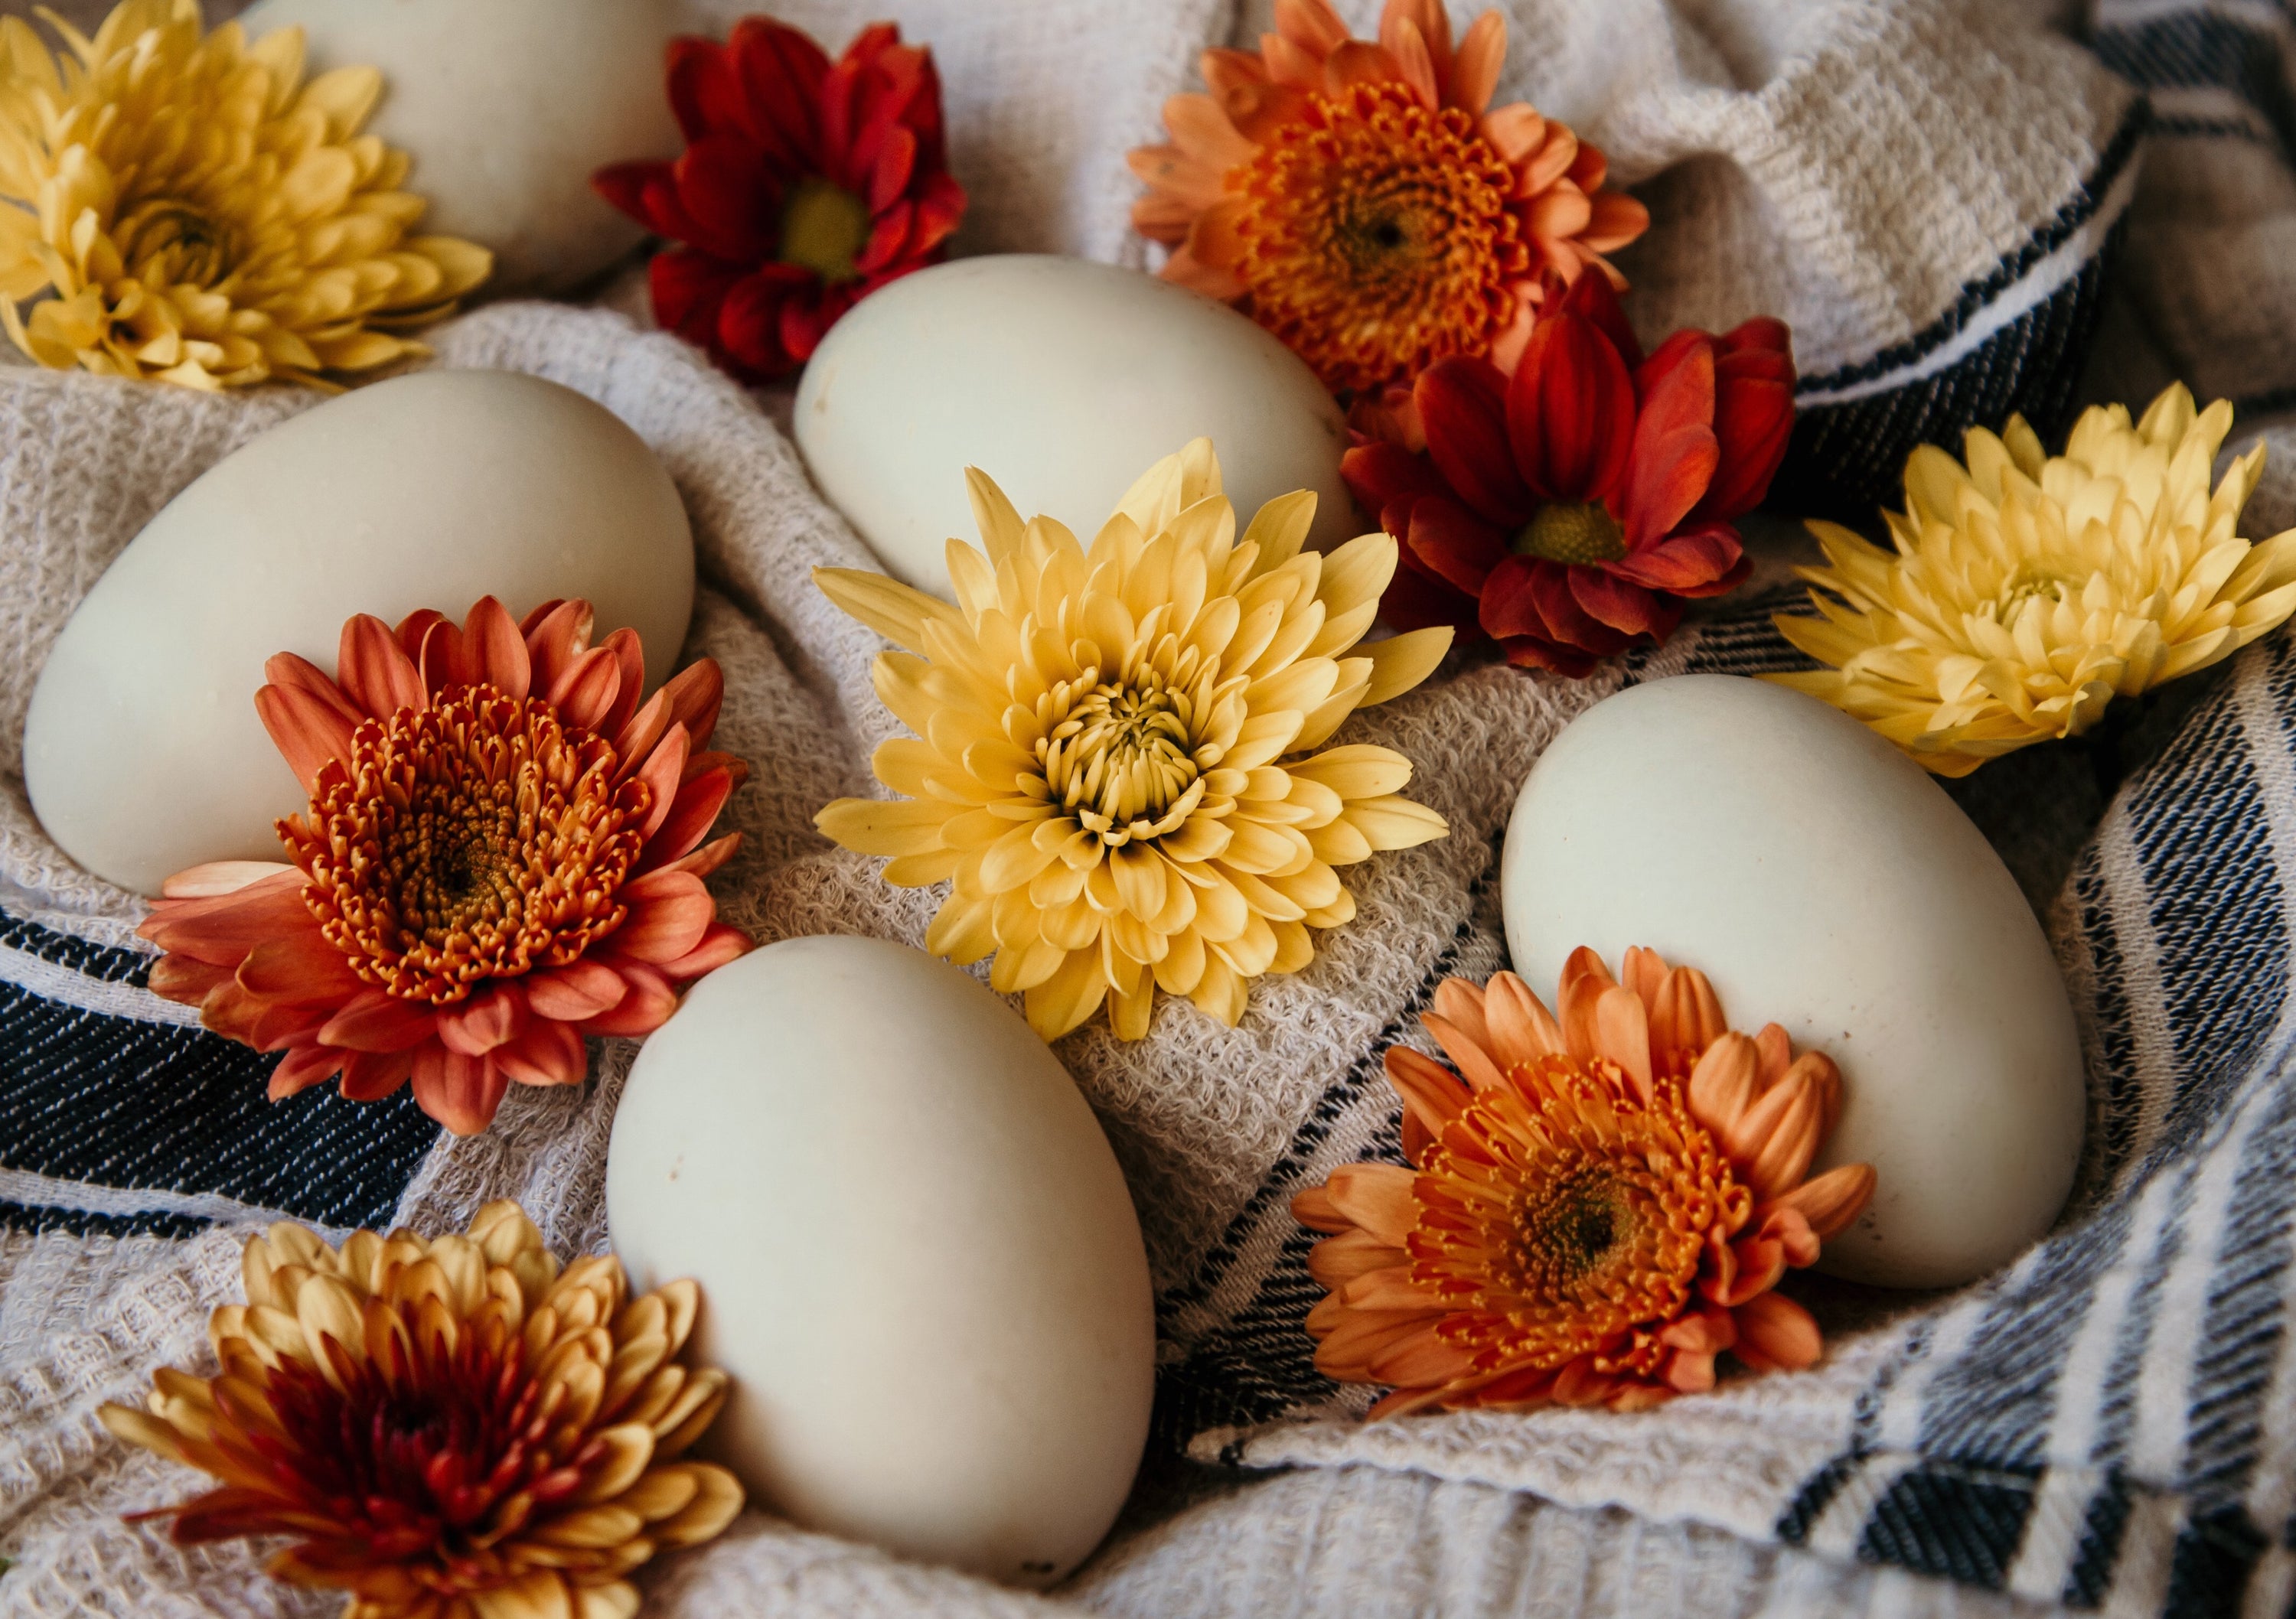 Everything you ever wanted to know about duck eggs